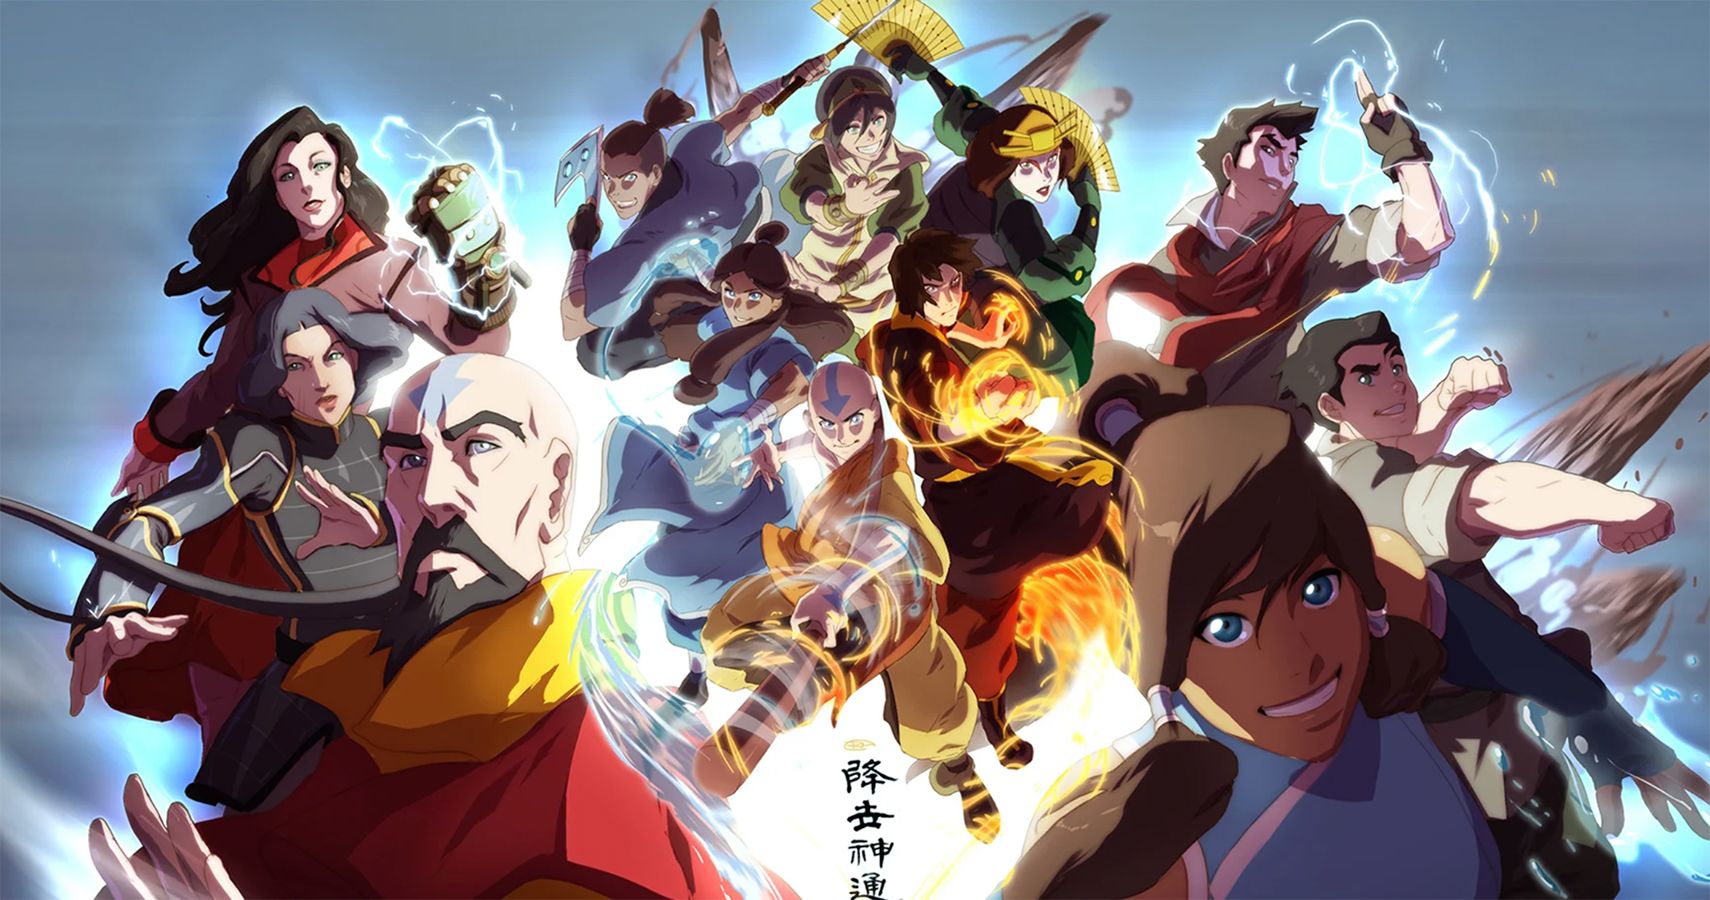 Which one do you like the most the last Airbender or the legends of korra  Let me know in the comments  rTheLastAirbender